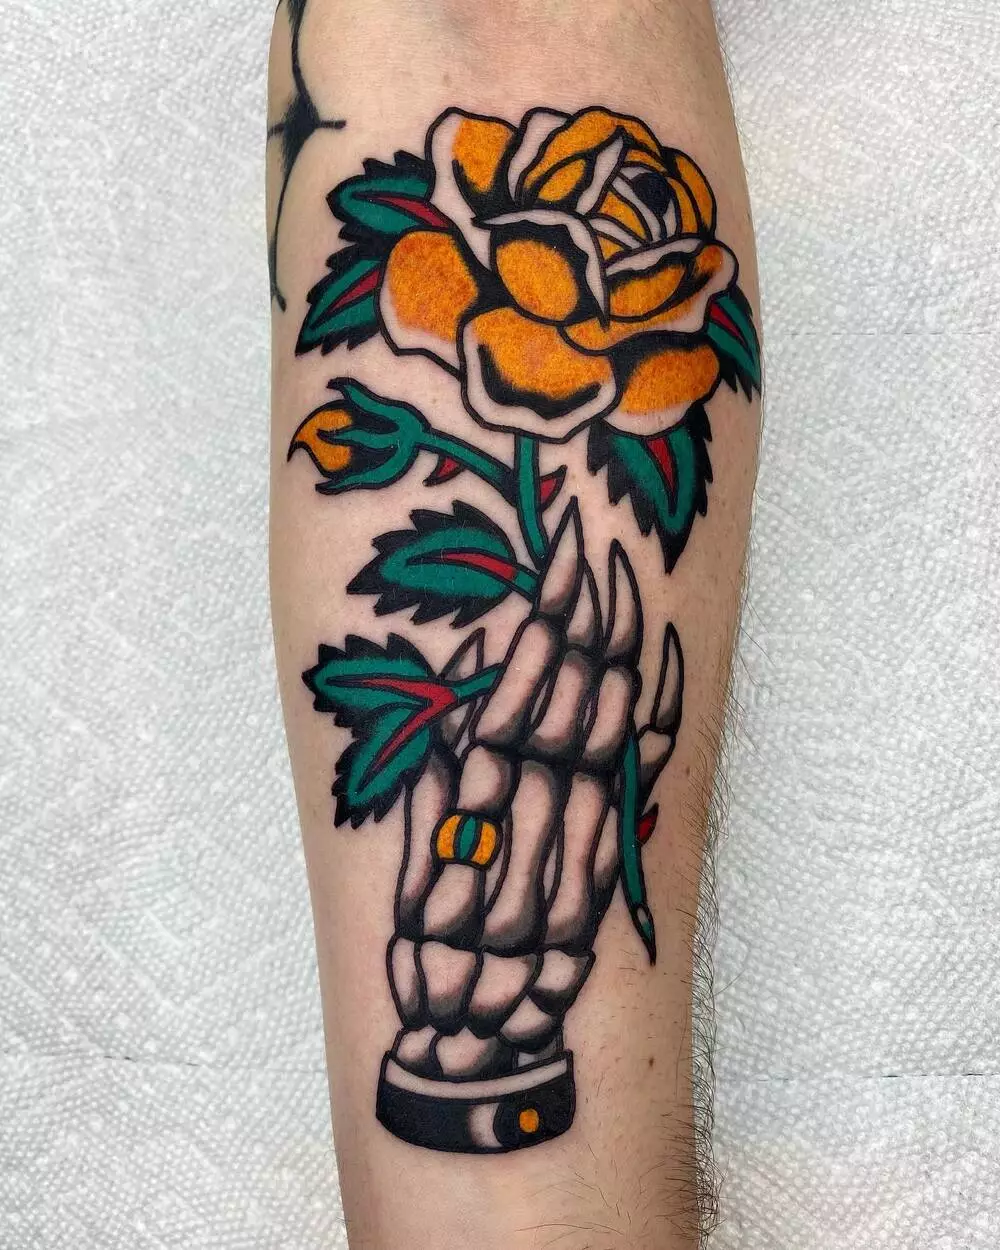 A Close-up Image of Traditional Skeleton Hand Holding Yellow Rose Tattoo